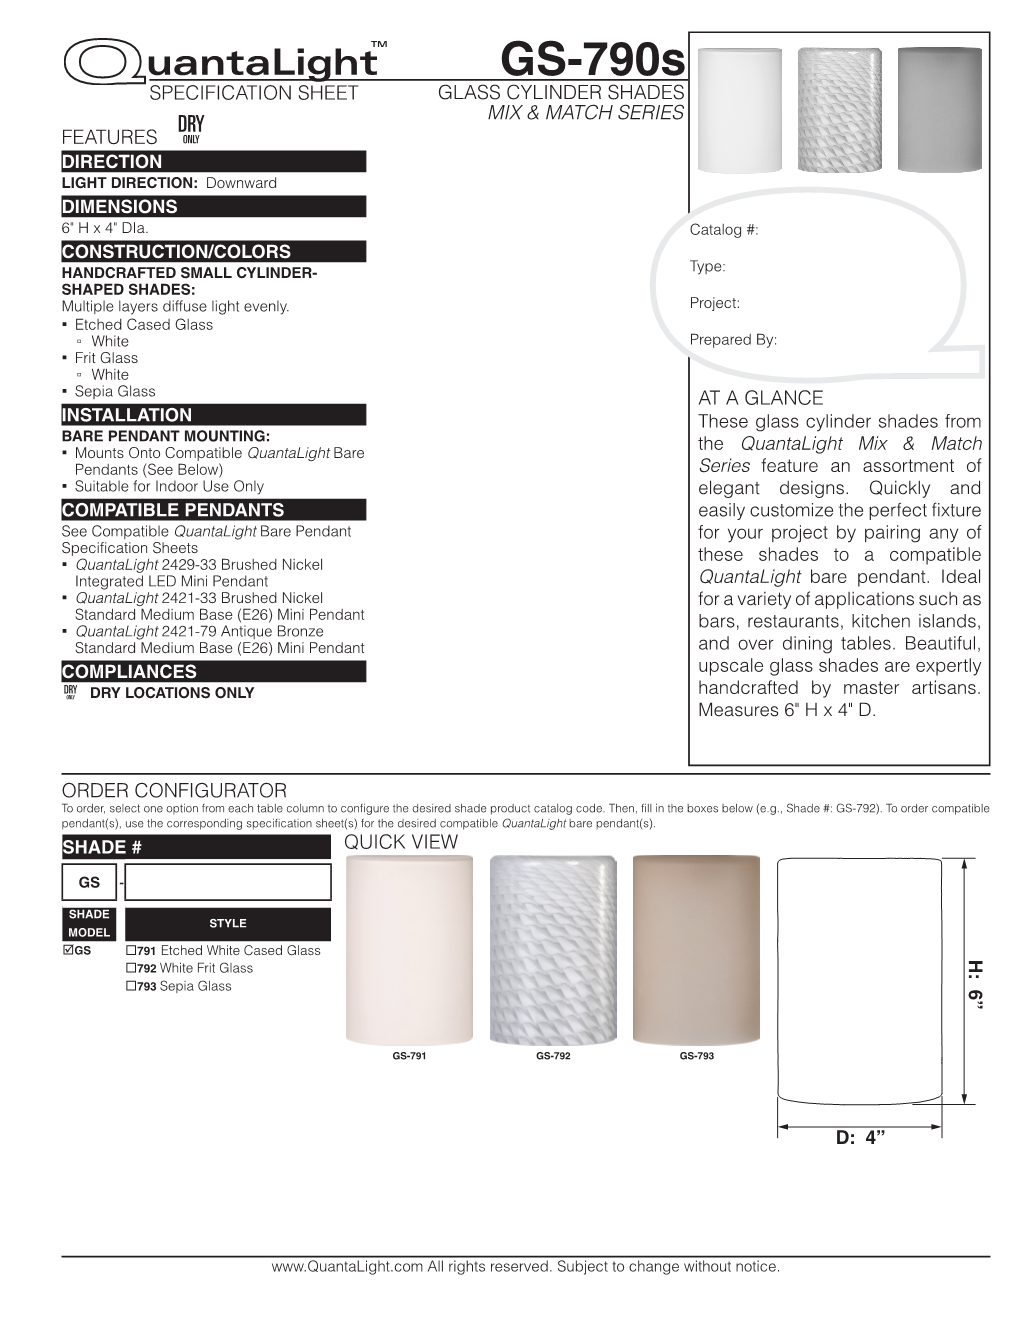 GS-790S SPECIFICATION SHEET GLASS CYLINDER SHADES MIX & MATCH SERIES DRY FEATURES ONLY DIRECTION LIGHT DIRECTION: Downward DIMENSIONS 6" H X 4" Dia